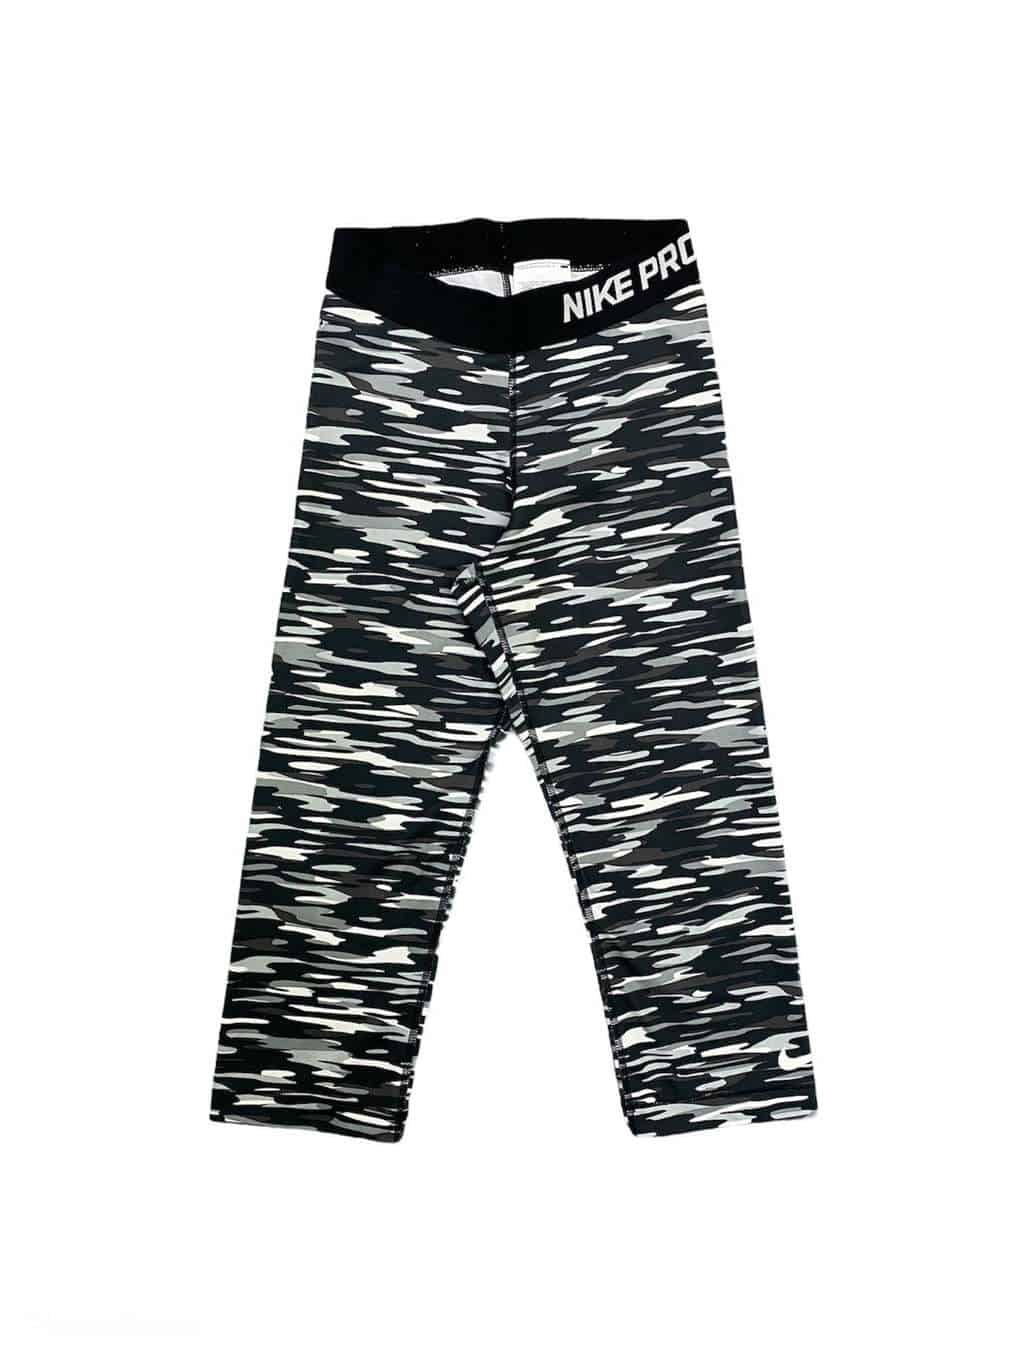 Women's Nike Pro Cropped Legging Cycling Shorts in Monochrome Camouflage  Print - XS - St Cyr Vintage